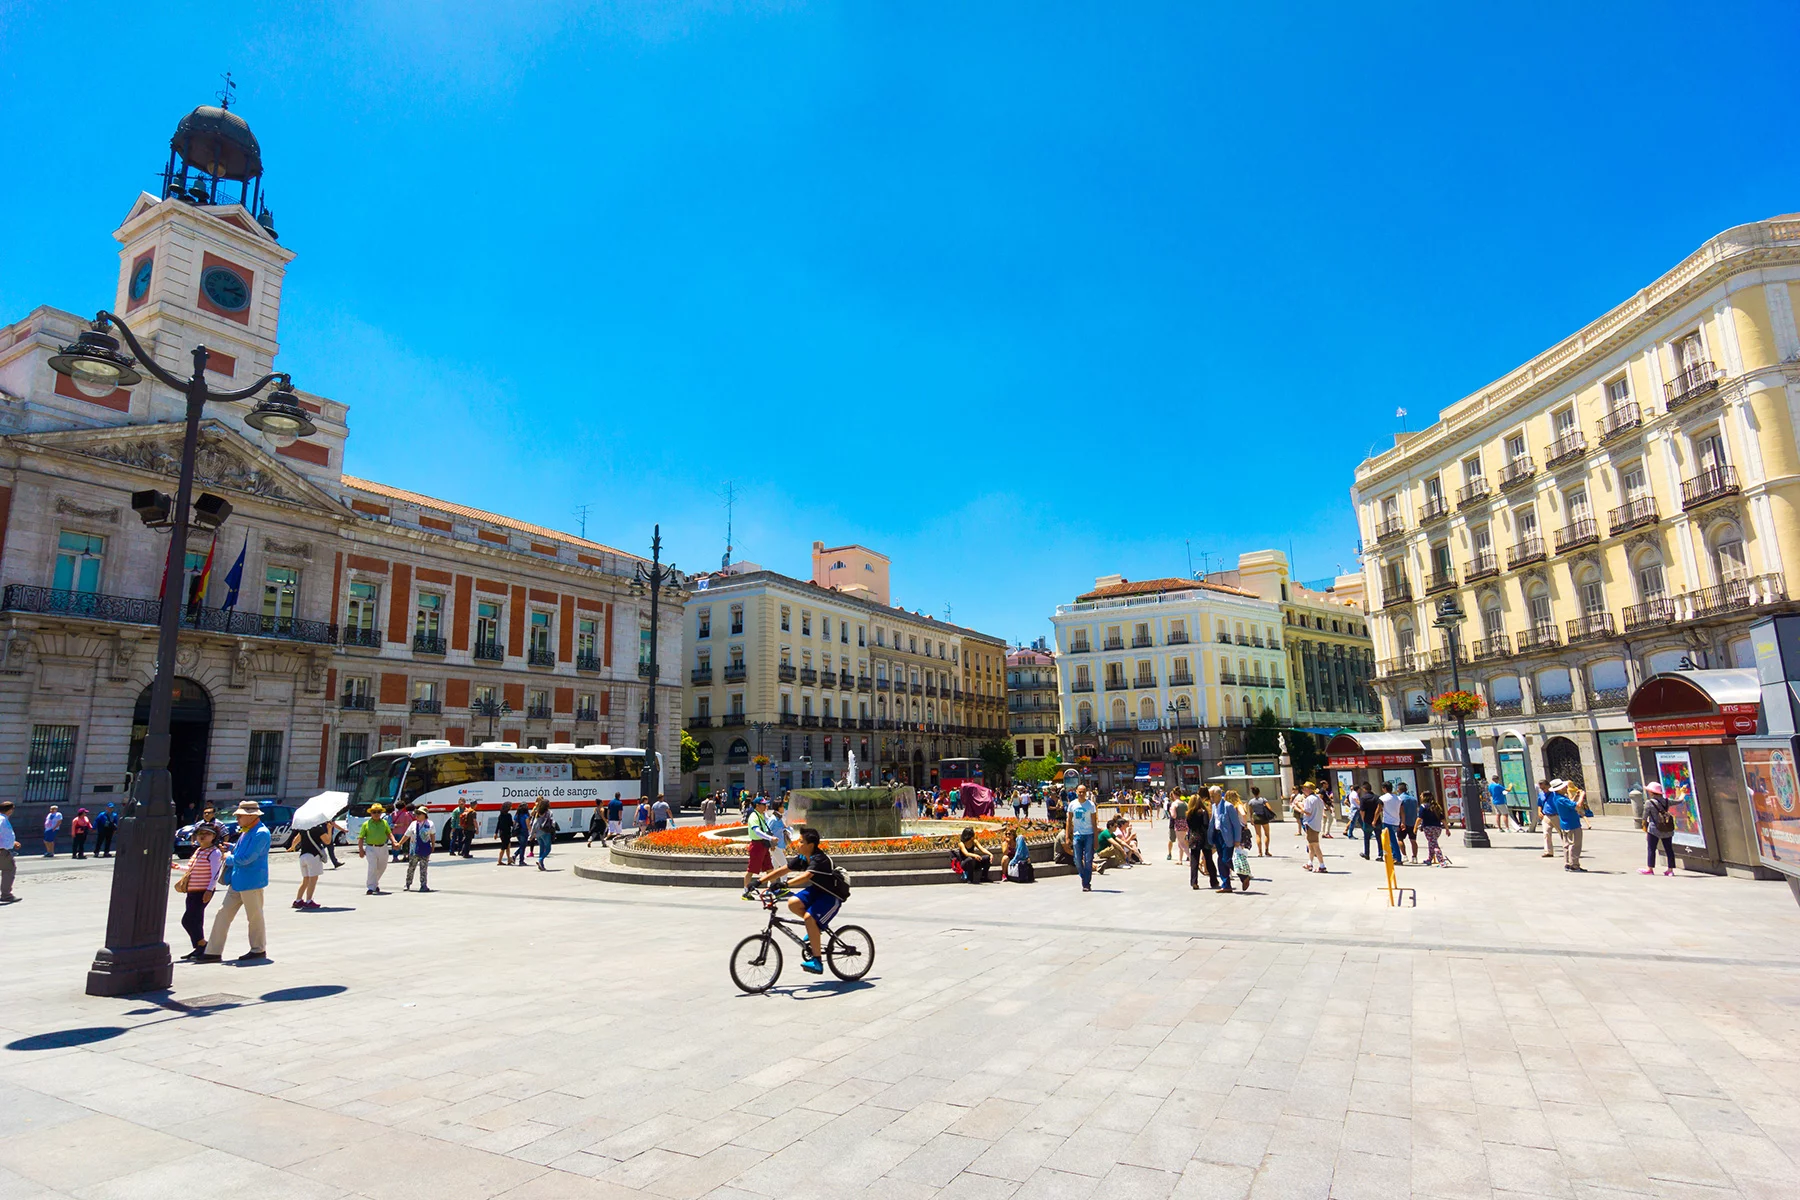 View of Plaza Puerta del Sol in Madrid